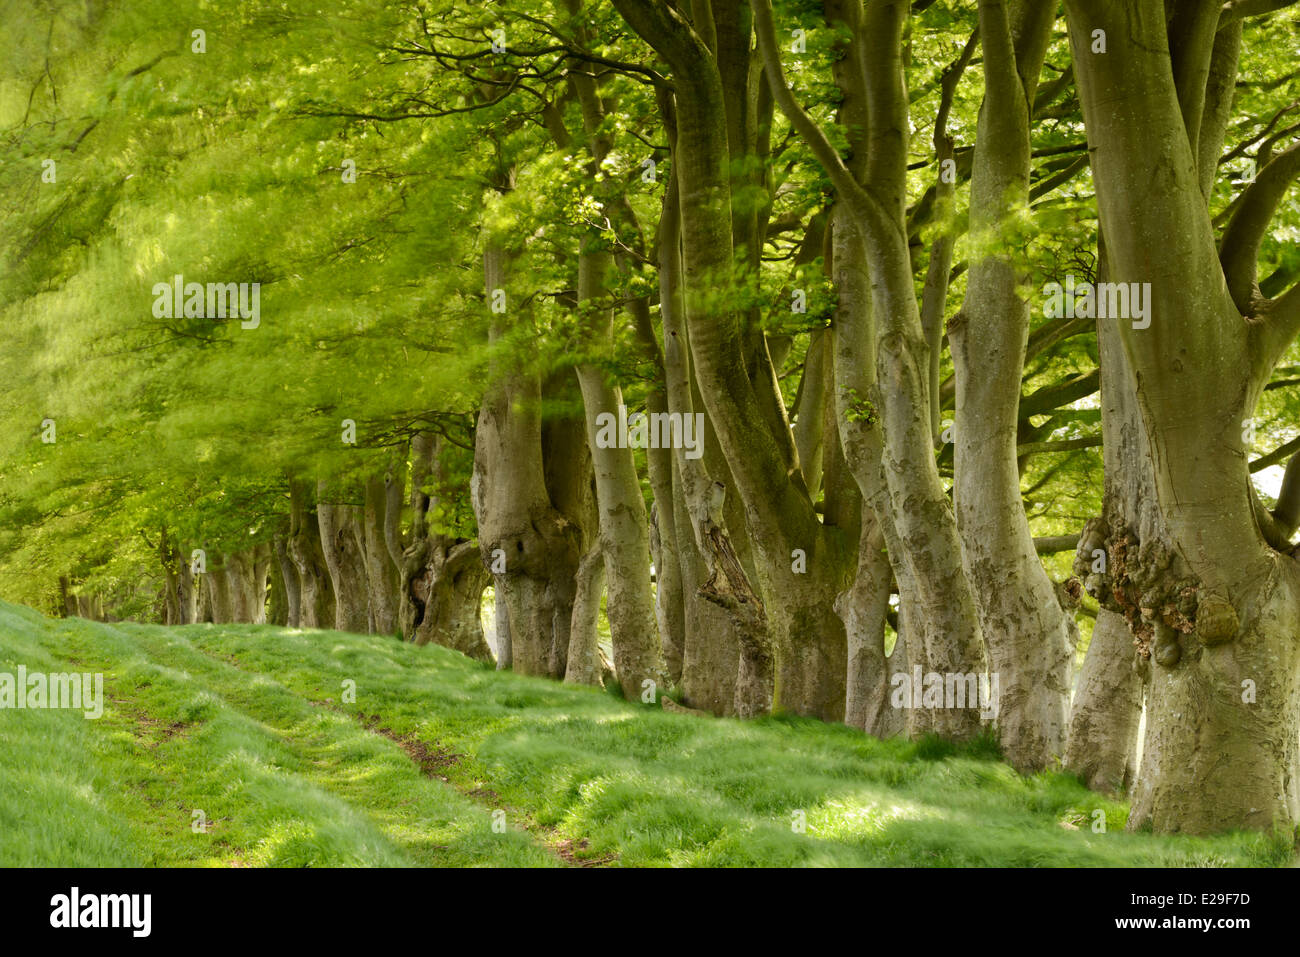 A row of Beech trees with fresh spring leaves at Draycott Sleights, Somerset. Stock Photo